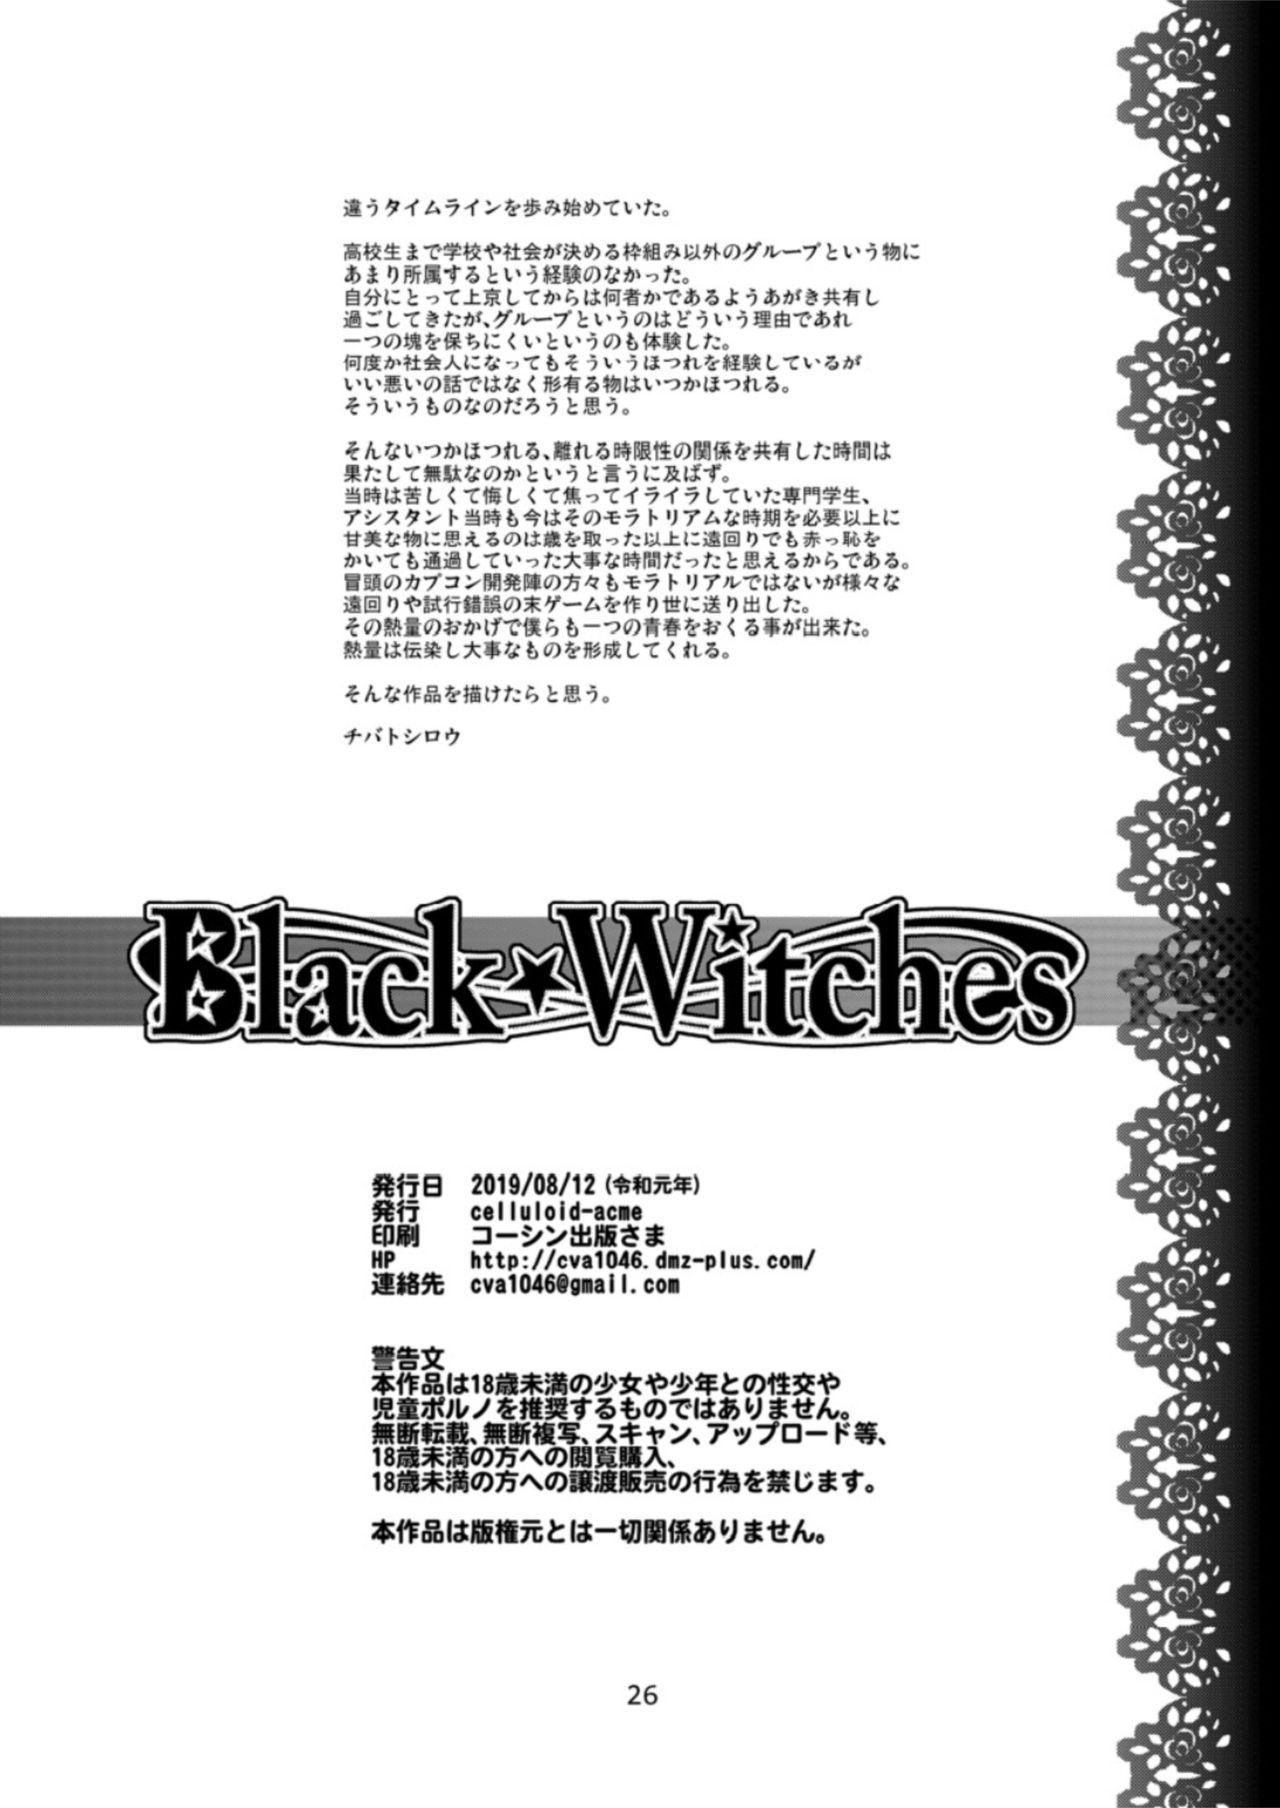 [CELLULOID-ACME (Chiba Toshirou)] Black Witches 2 [Digital] page 25 full